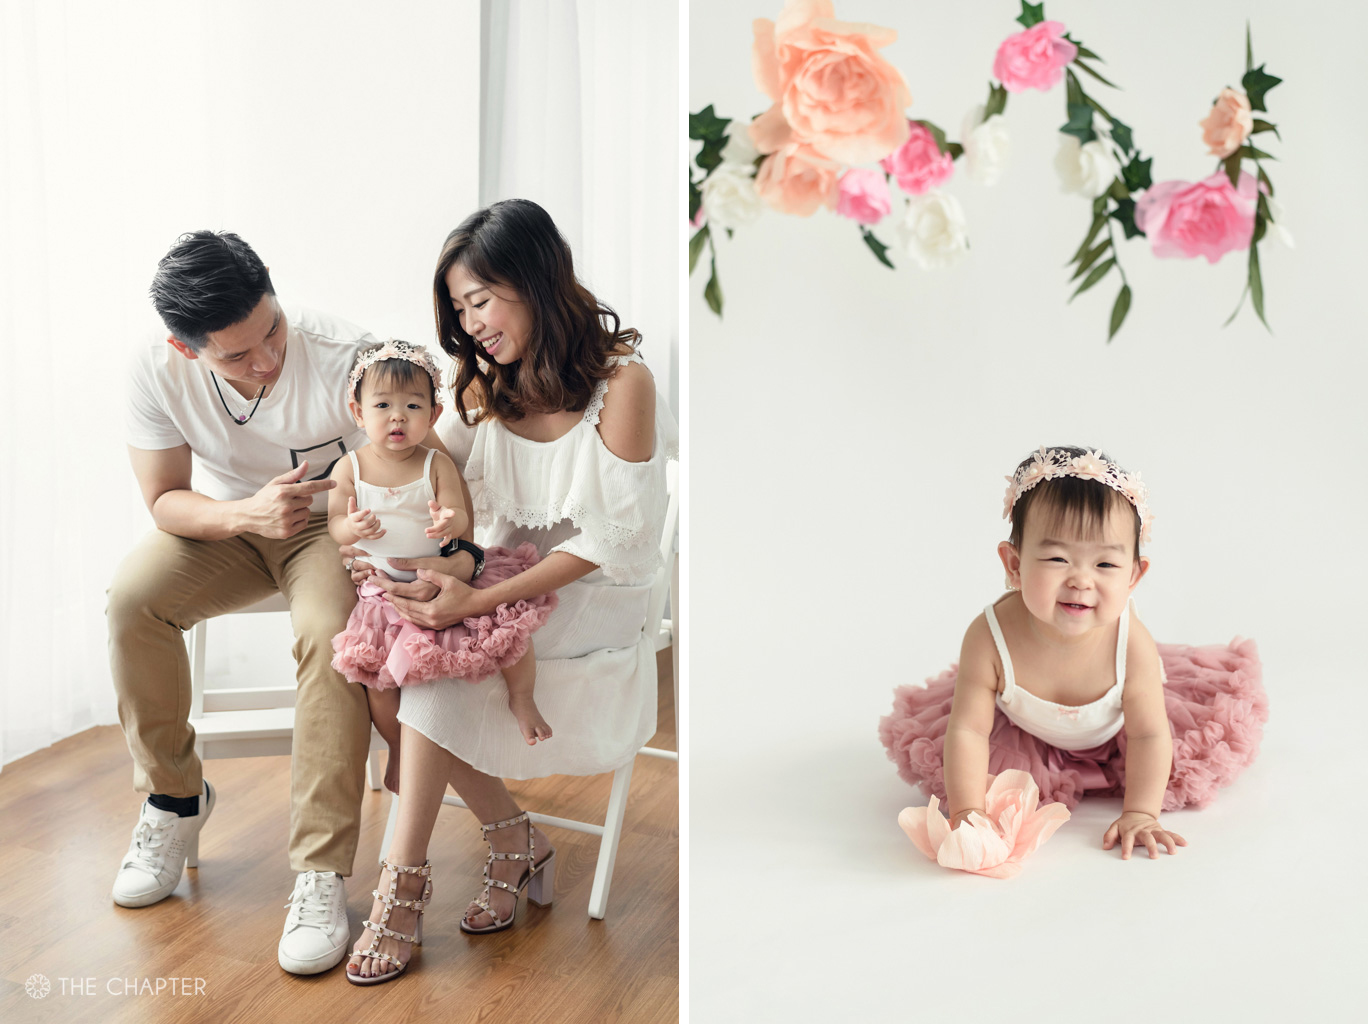 baby portraits photography photographer ipoh, family portraits ipoh, the chapter ipoh, malaysia, newborn photography ipoh, cake smash